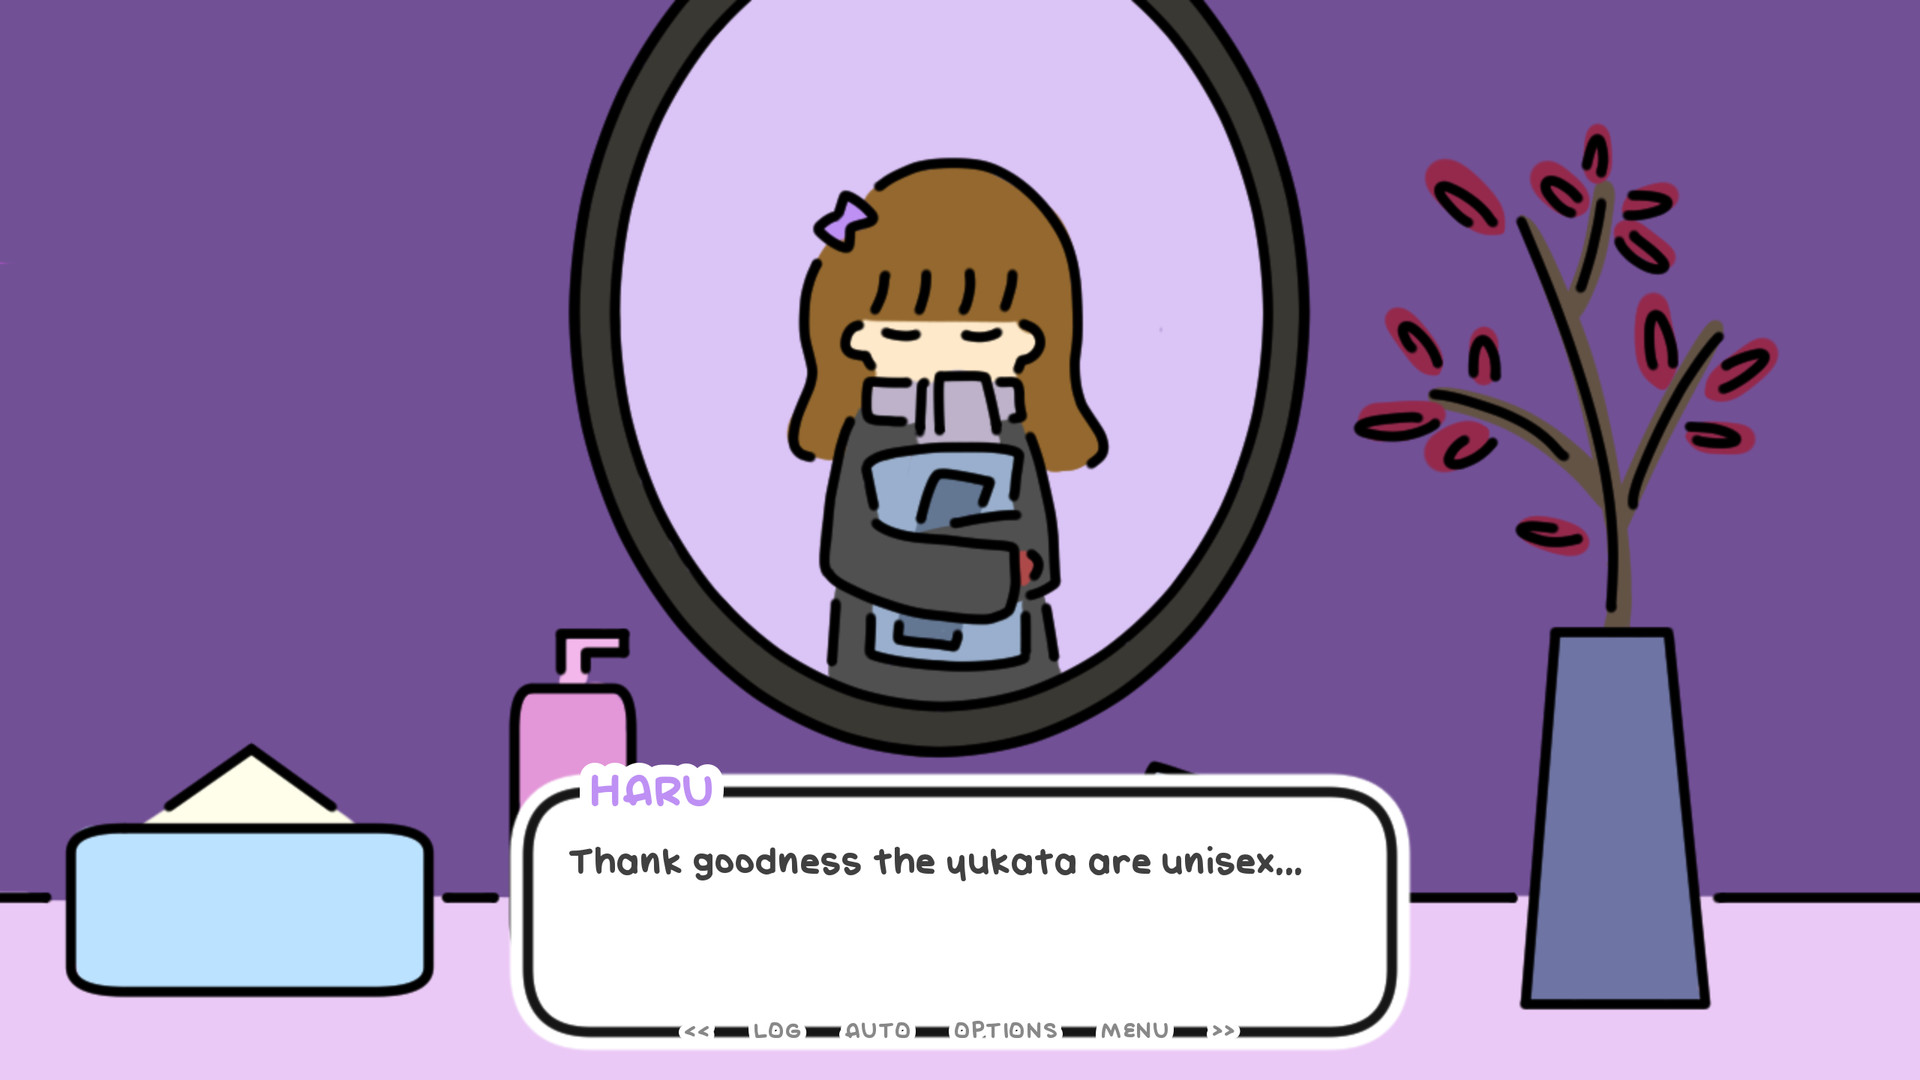 A young woman with long brown hair and a purple bowl appears in a mirror, holding on to a bundle of clothing to her chest with her eyes shut. Text within a dialogue box at the bottom of the image under the name, "Haru", reads, "Thank goodness the yukata are unisex..."